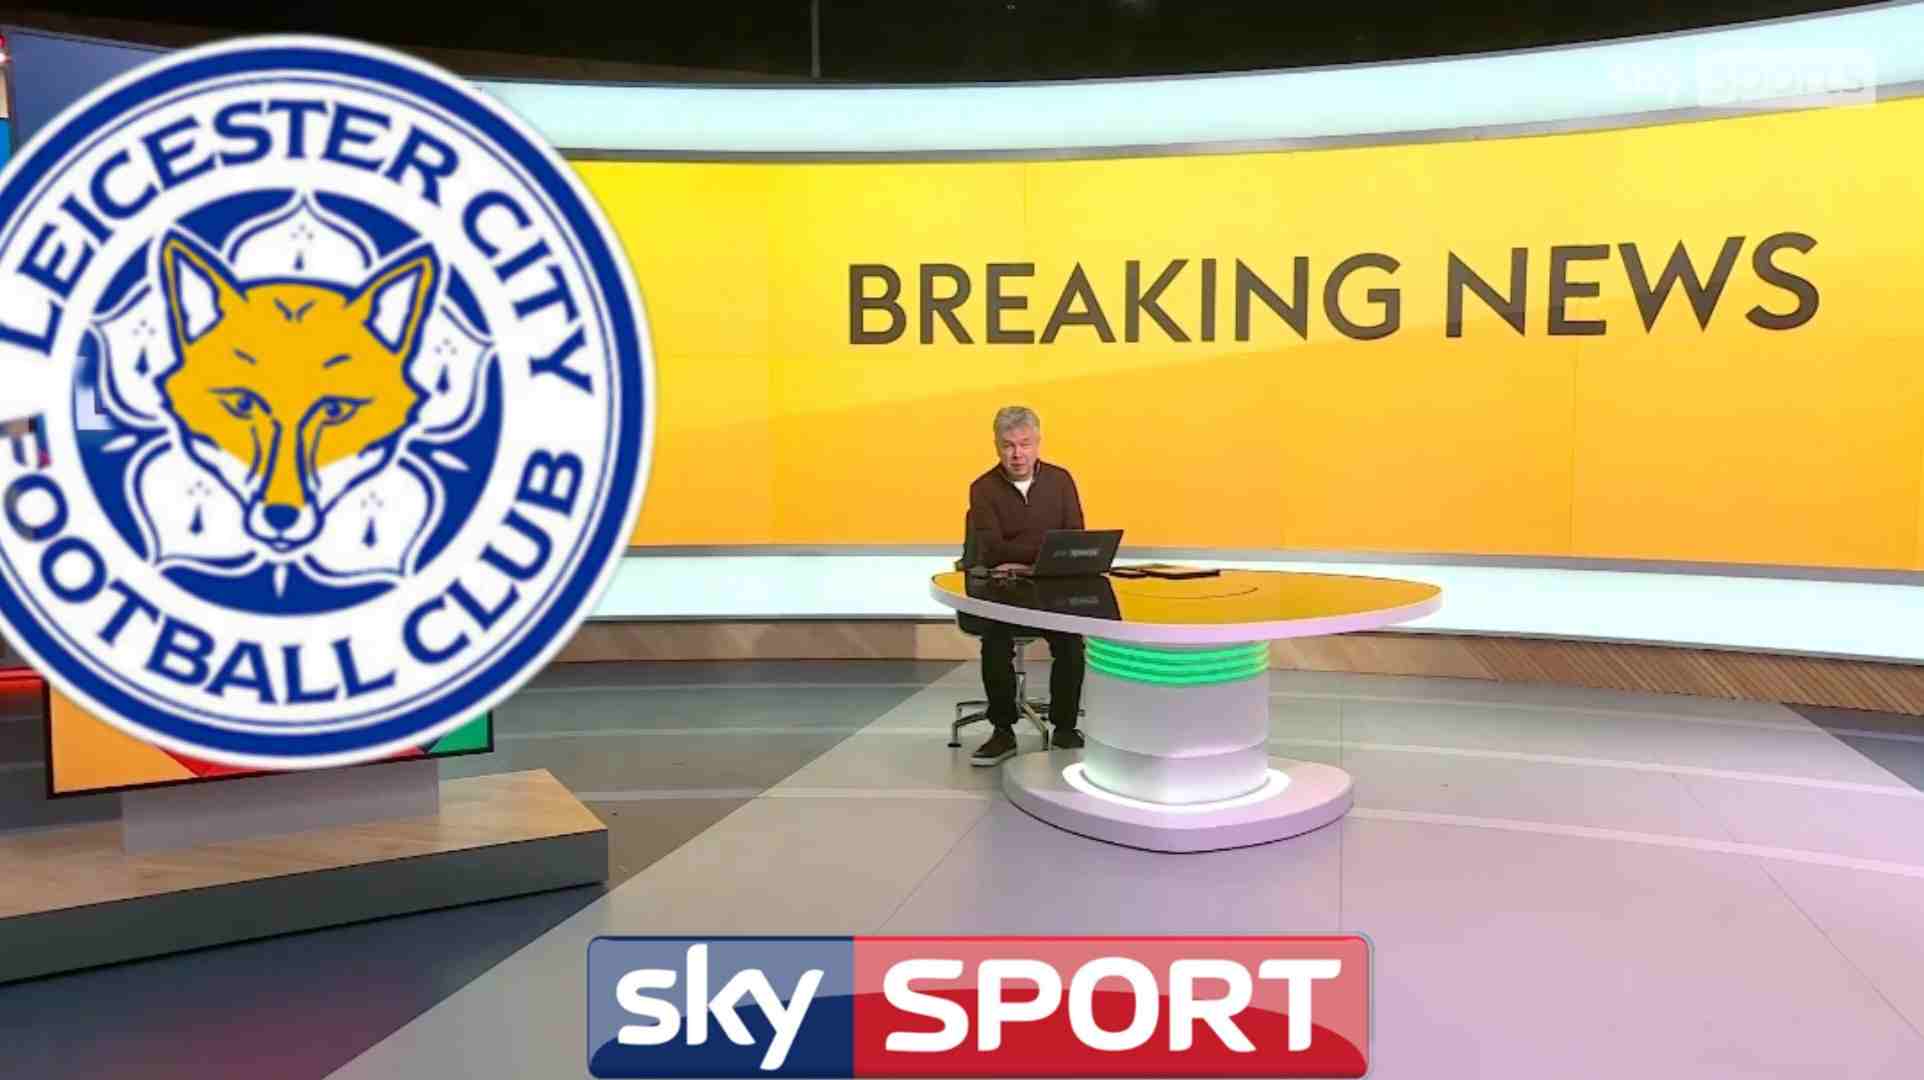 Done Deal – Foxes have struck agreement with Top talented midfielder who has agreed a 4-year deal on summer transfer to Leicester City as deal to be completed in the next 12 hours